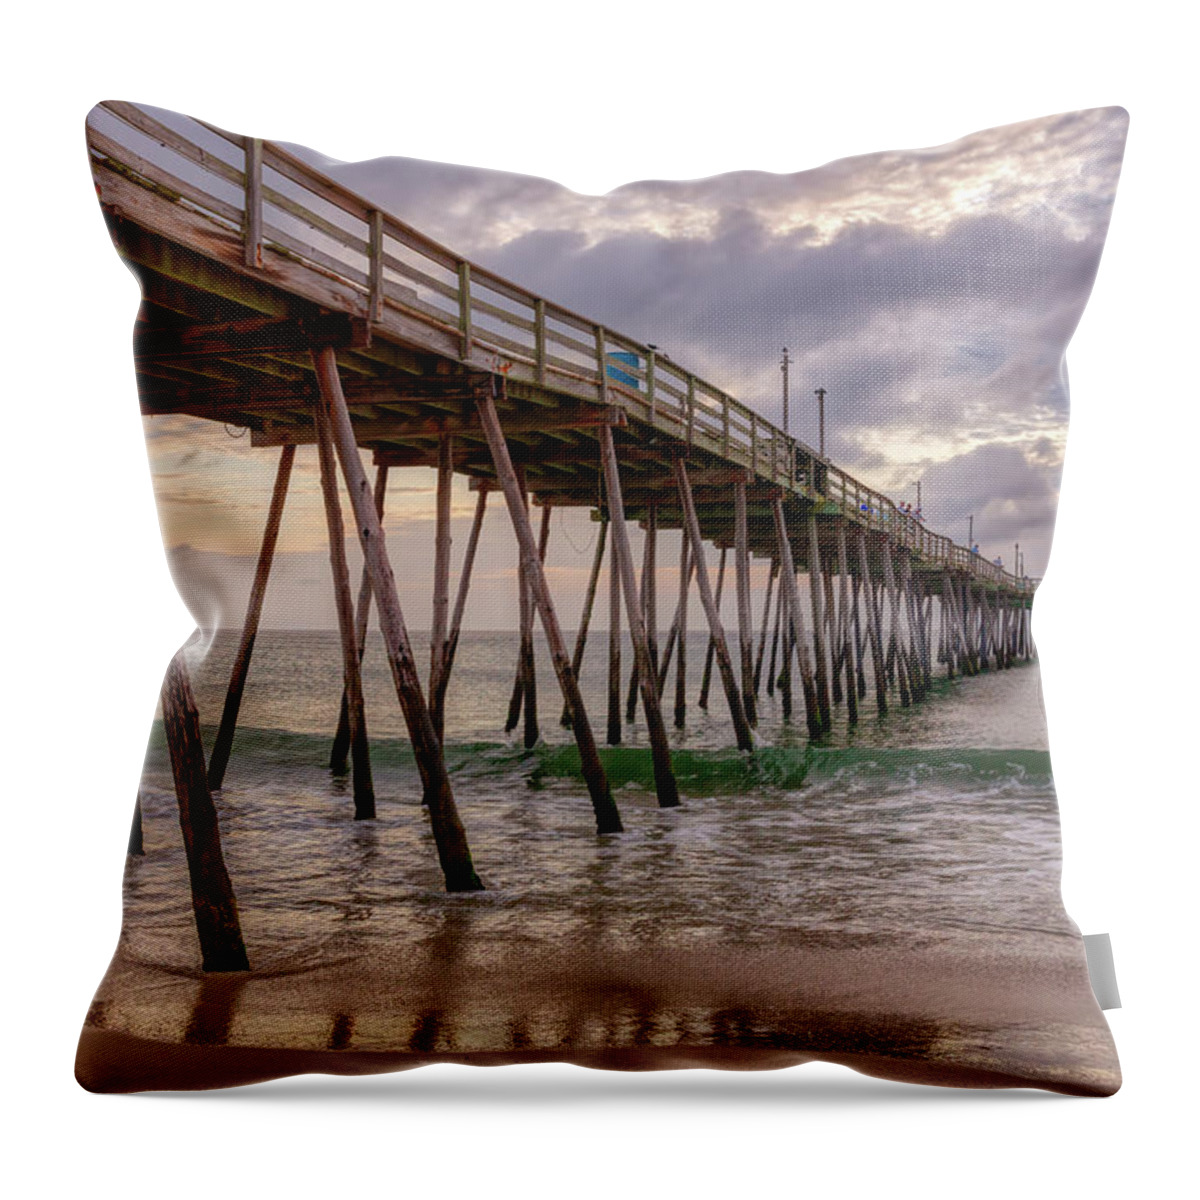 Ocean Throw Pillow featuring the photograph Warm Avalon Pier Sunrise by Donna Twiford